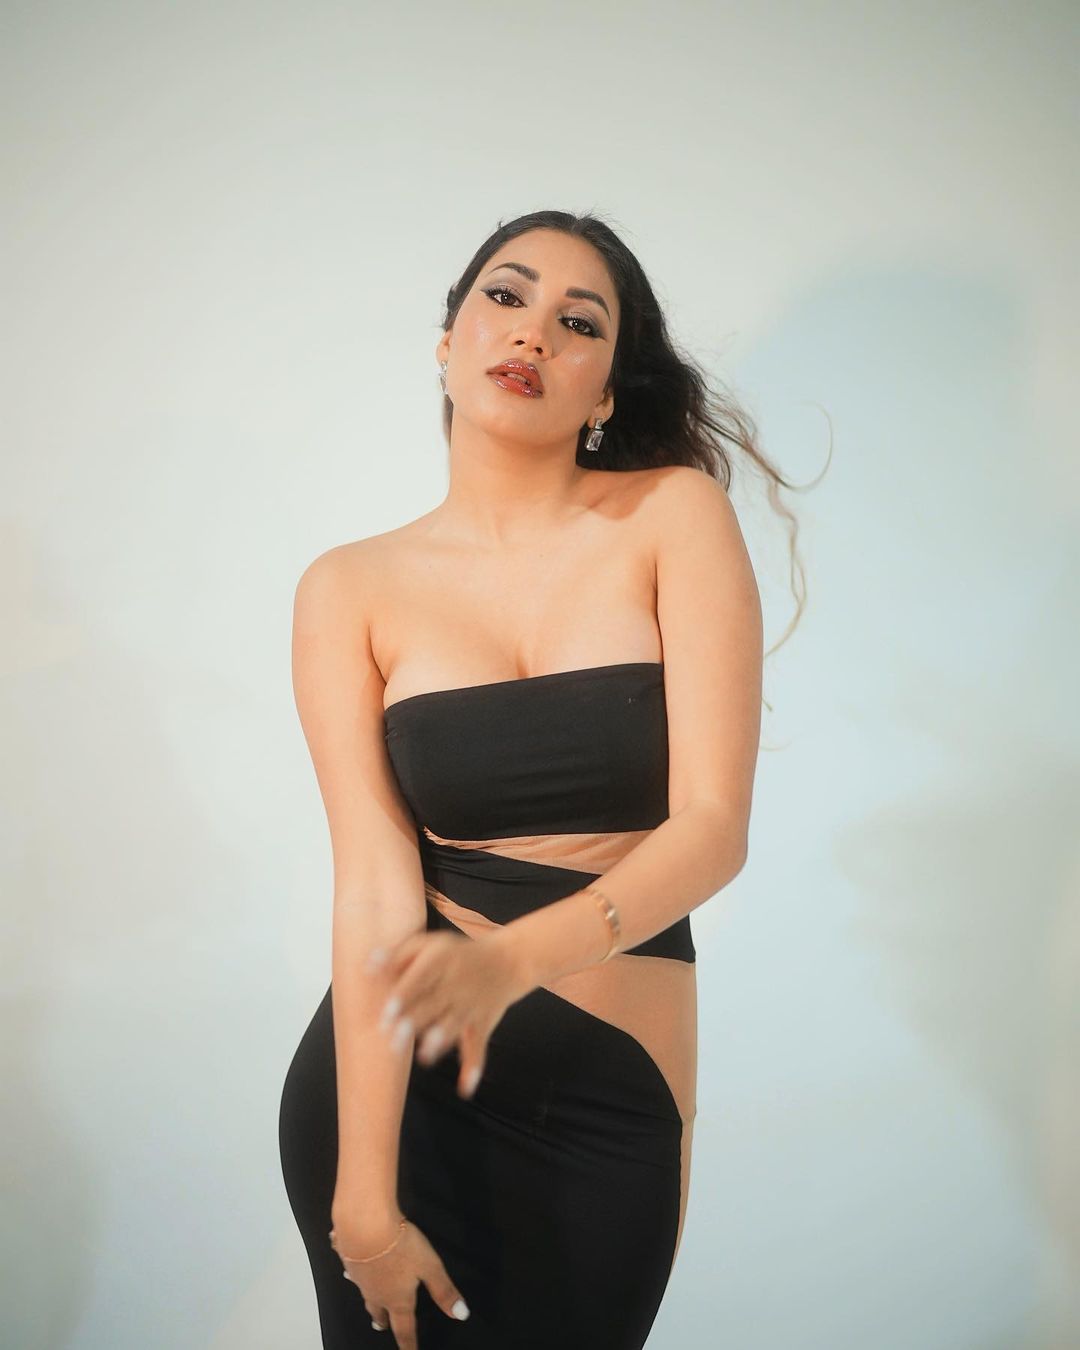 Mumbai model shivani singh looks sizziling and spicy hot in this outfit-@shivani.singhh, Shivani Singh, Shivanisingh Photos,Spicy Hot Pics,Images,High Resolution WallPapers Download